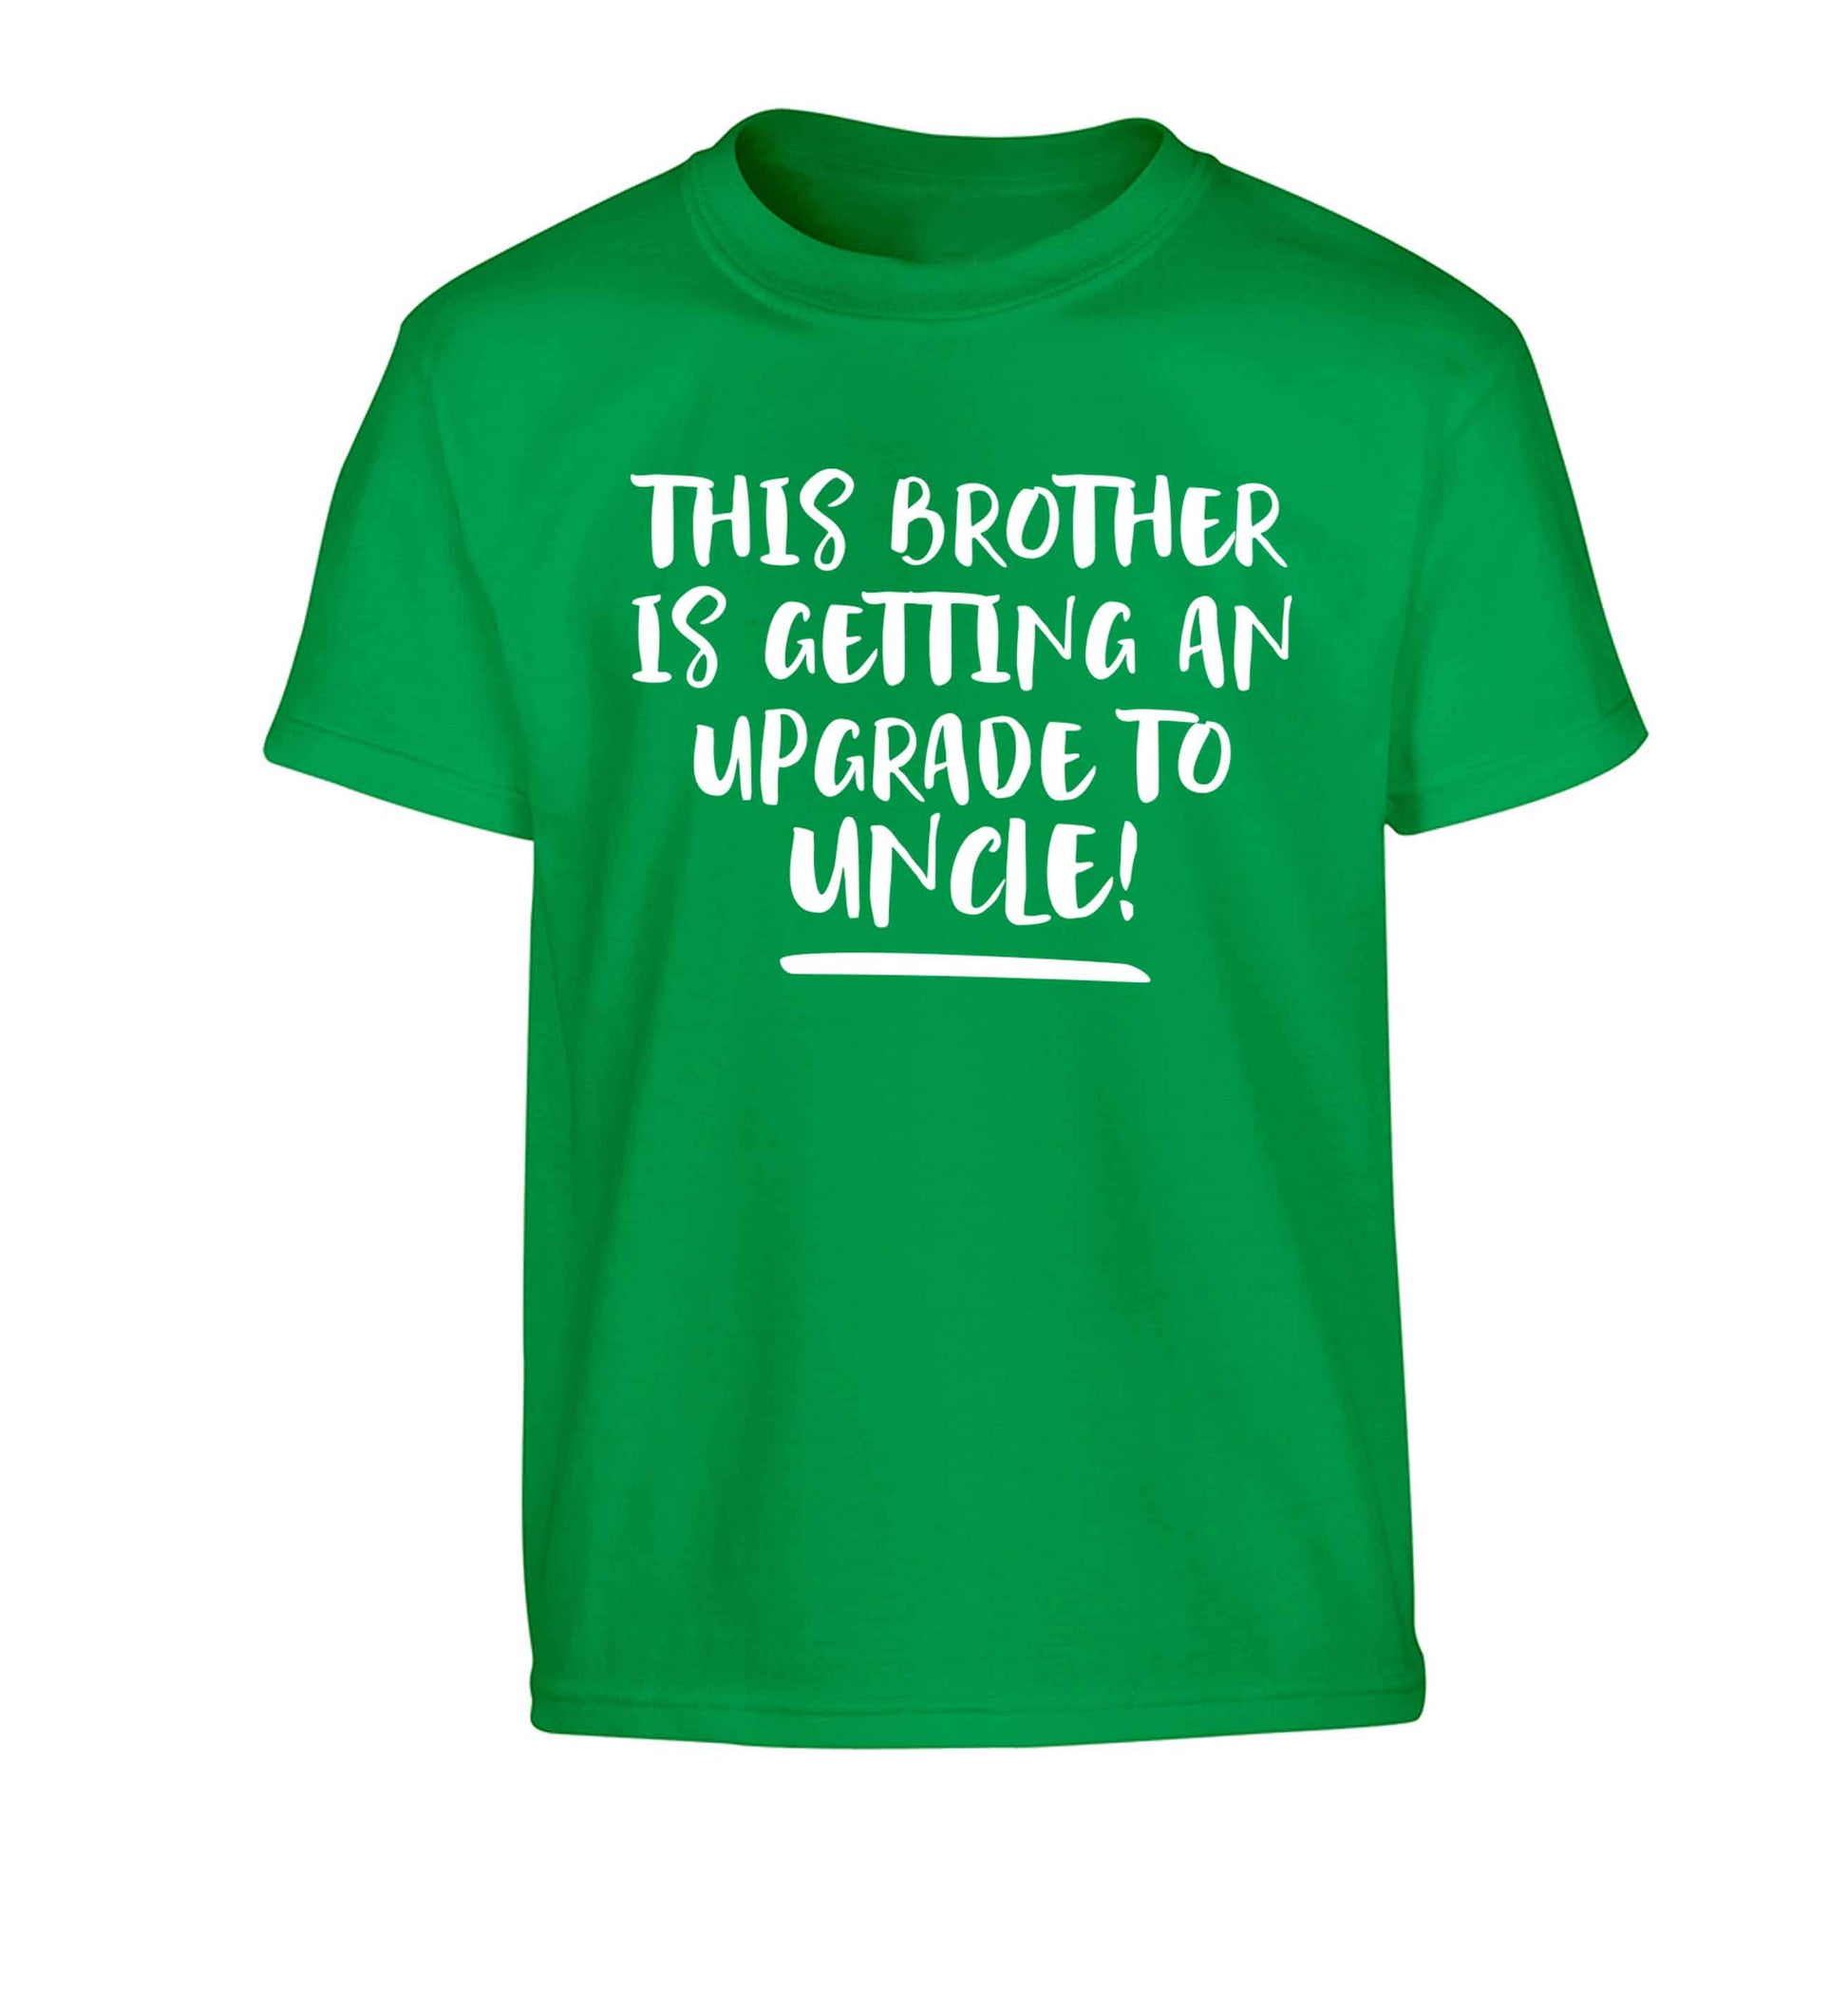 This brother is getting an upgrade to uncle! Children's green Tshirt 12-13 Years